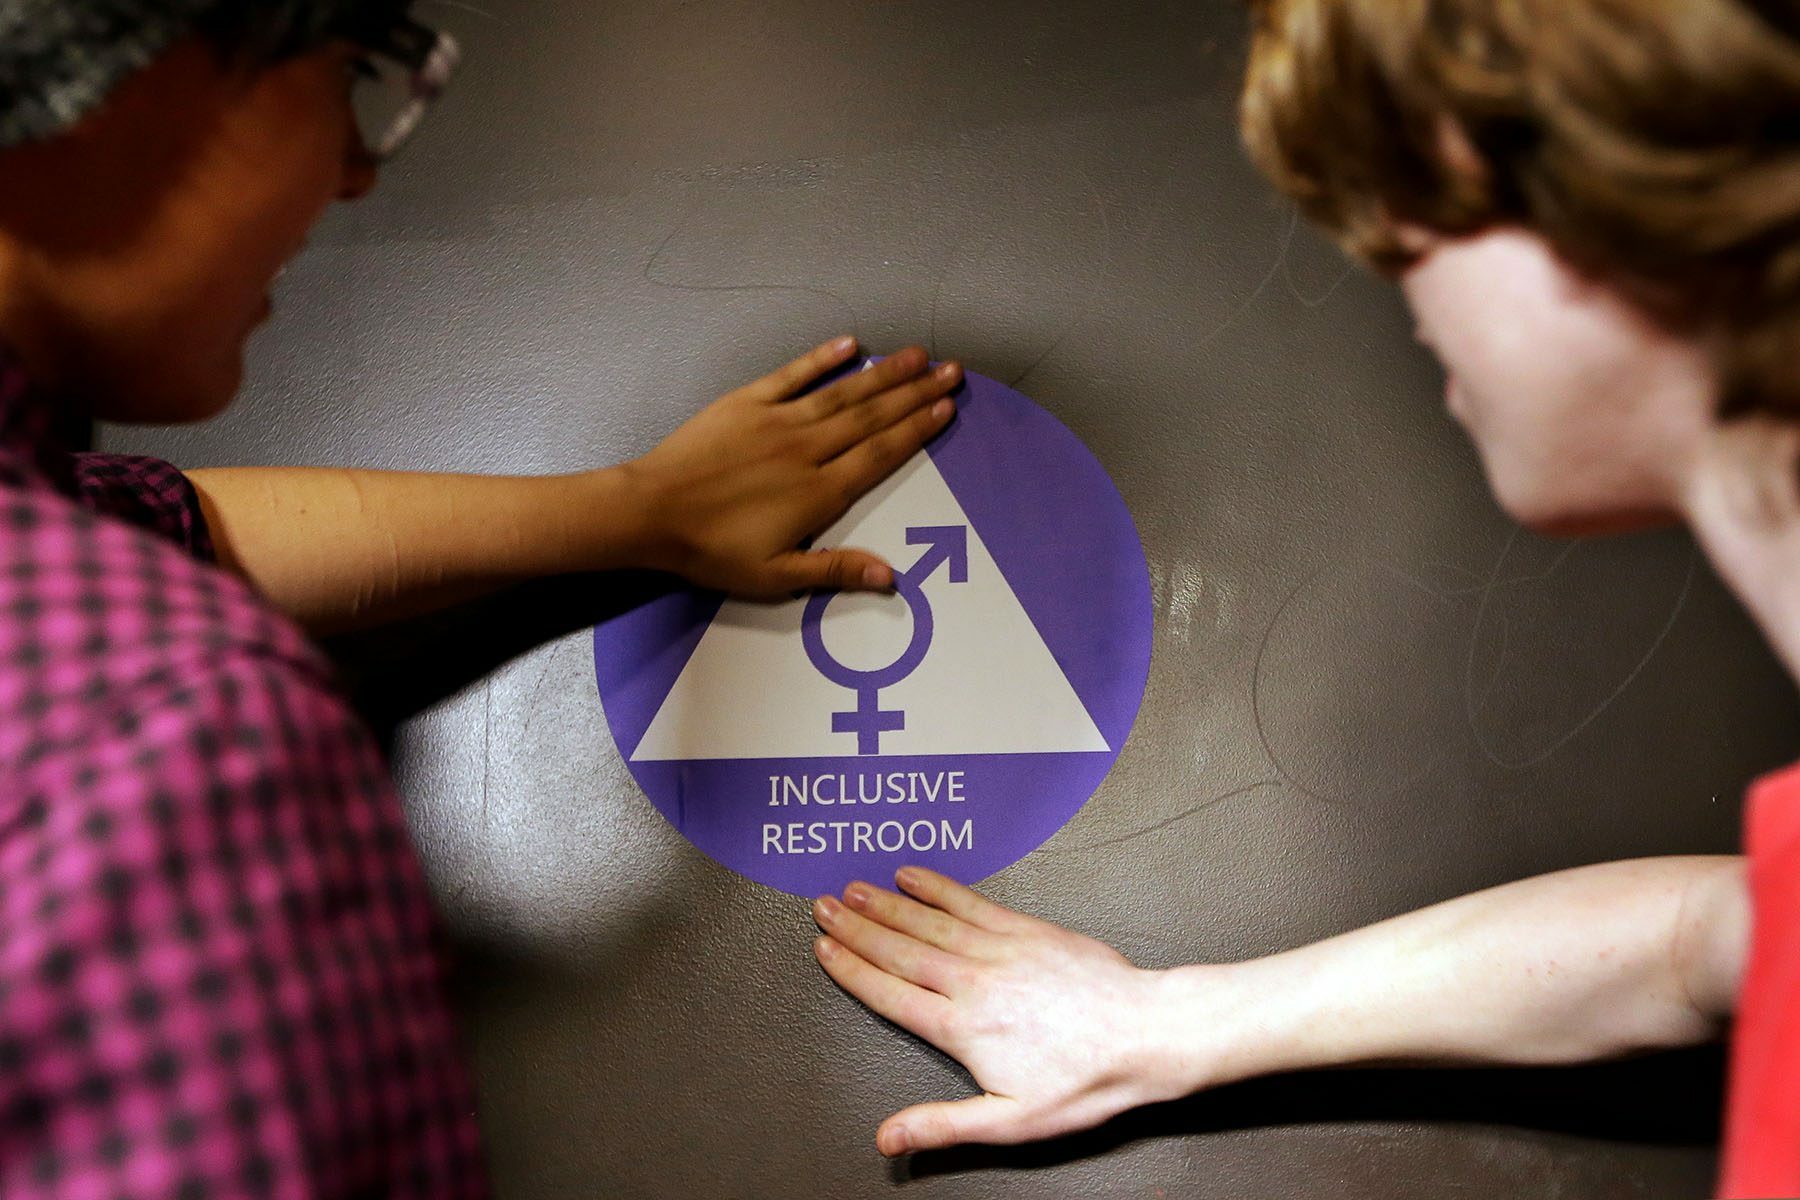 Students place a sticker on the door at the ceremonial opening of a gender neutral bathroom.